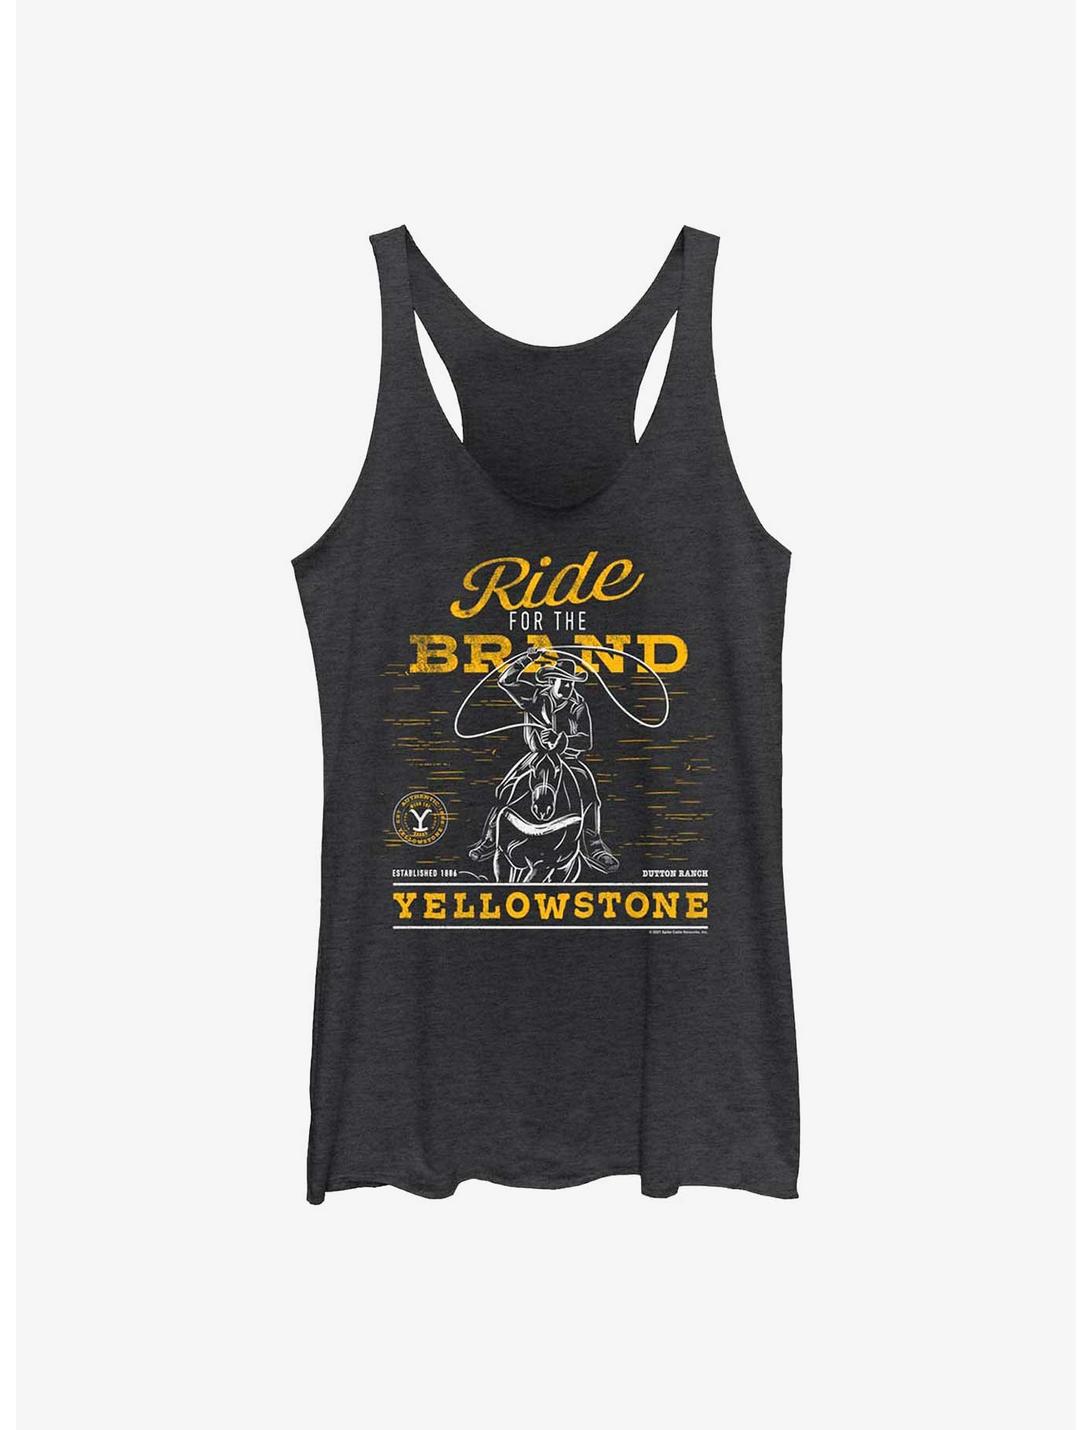 Yellowstone Ride For The Brand Womens Tank Top, BLK HTR, hi-res